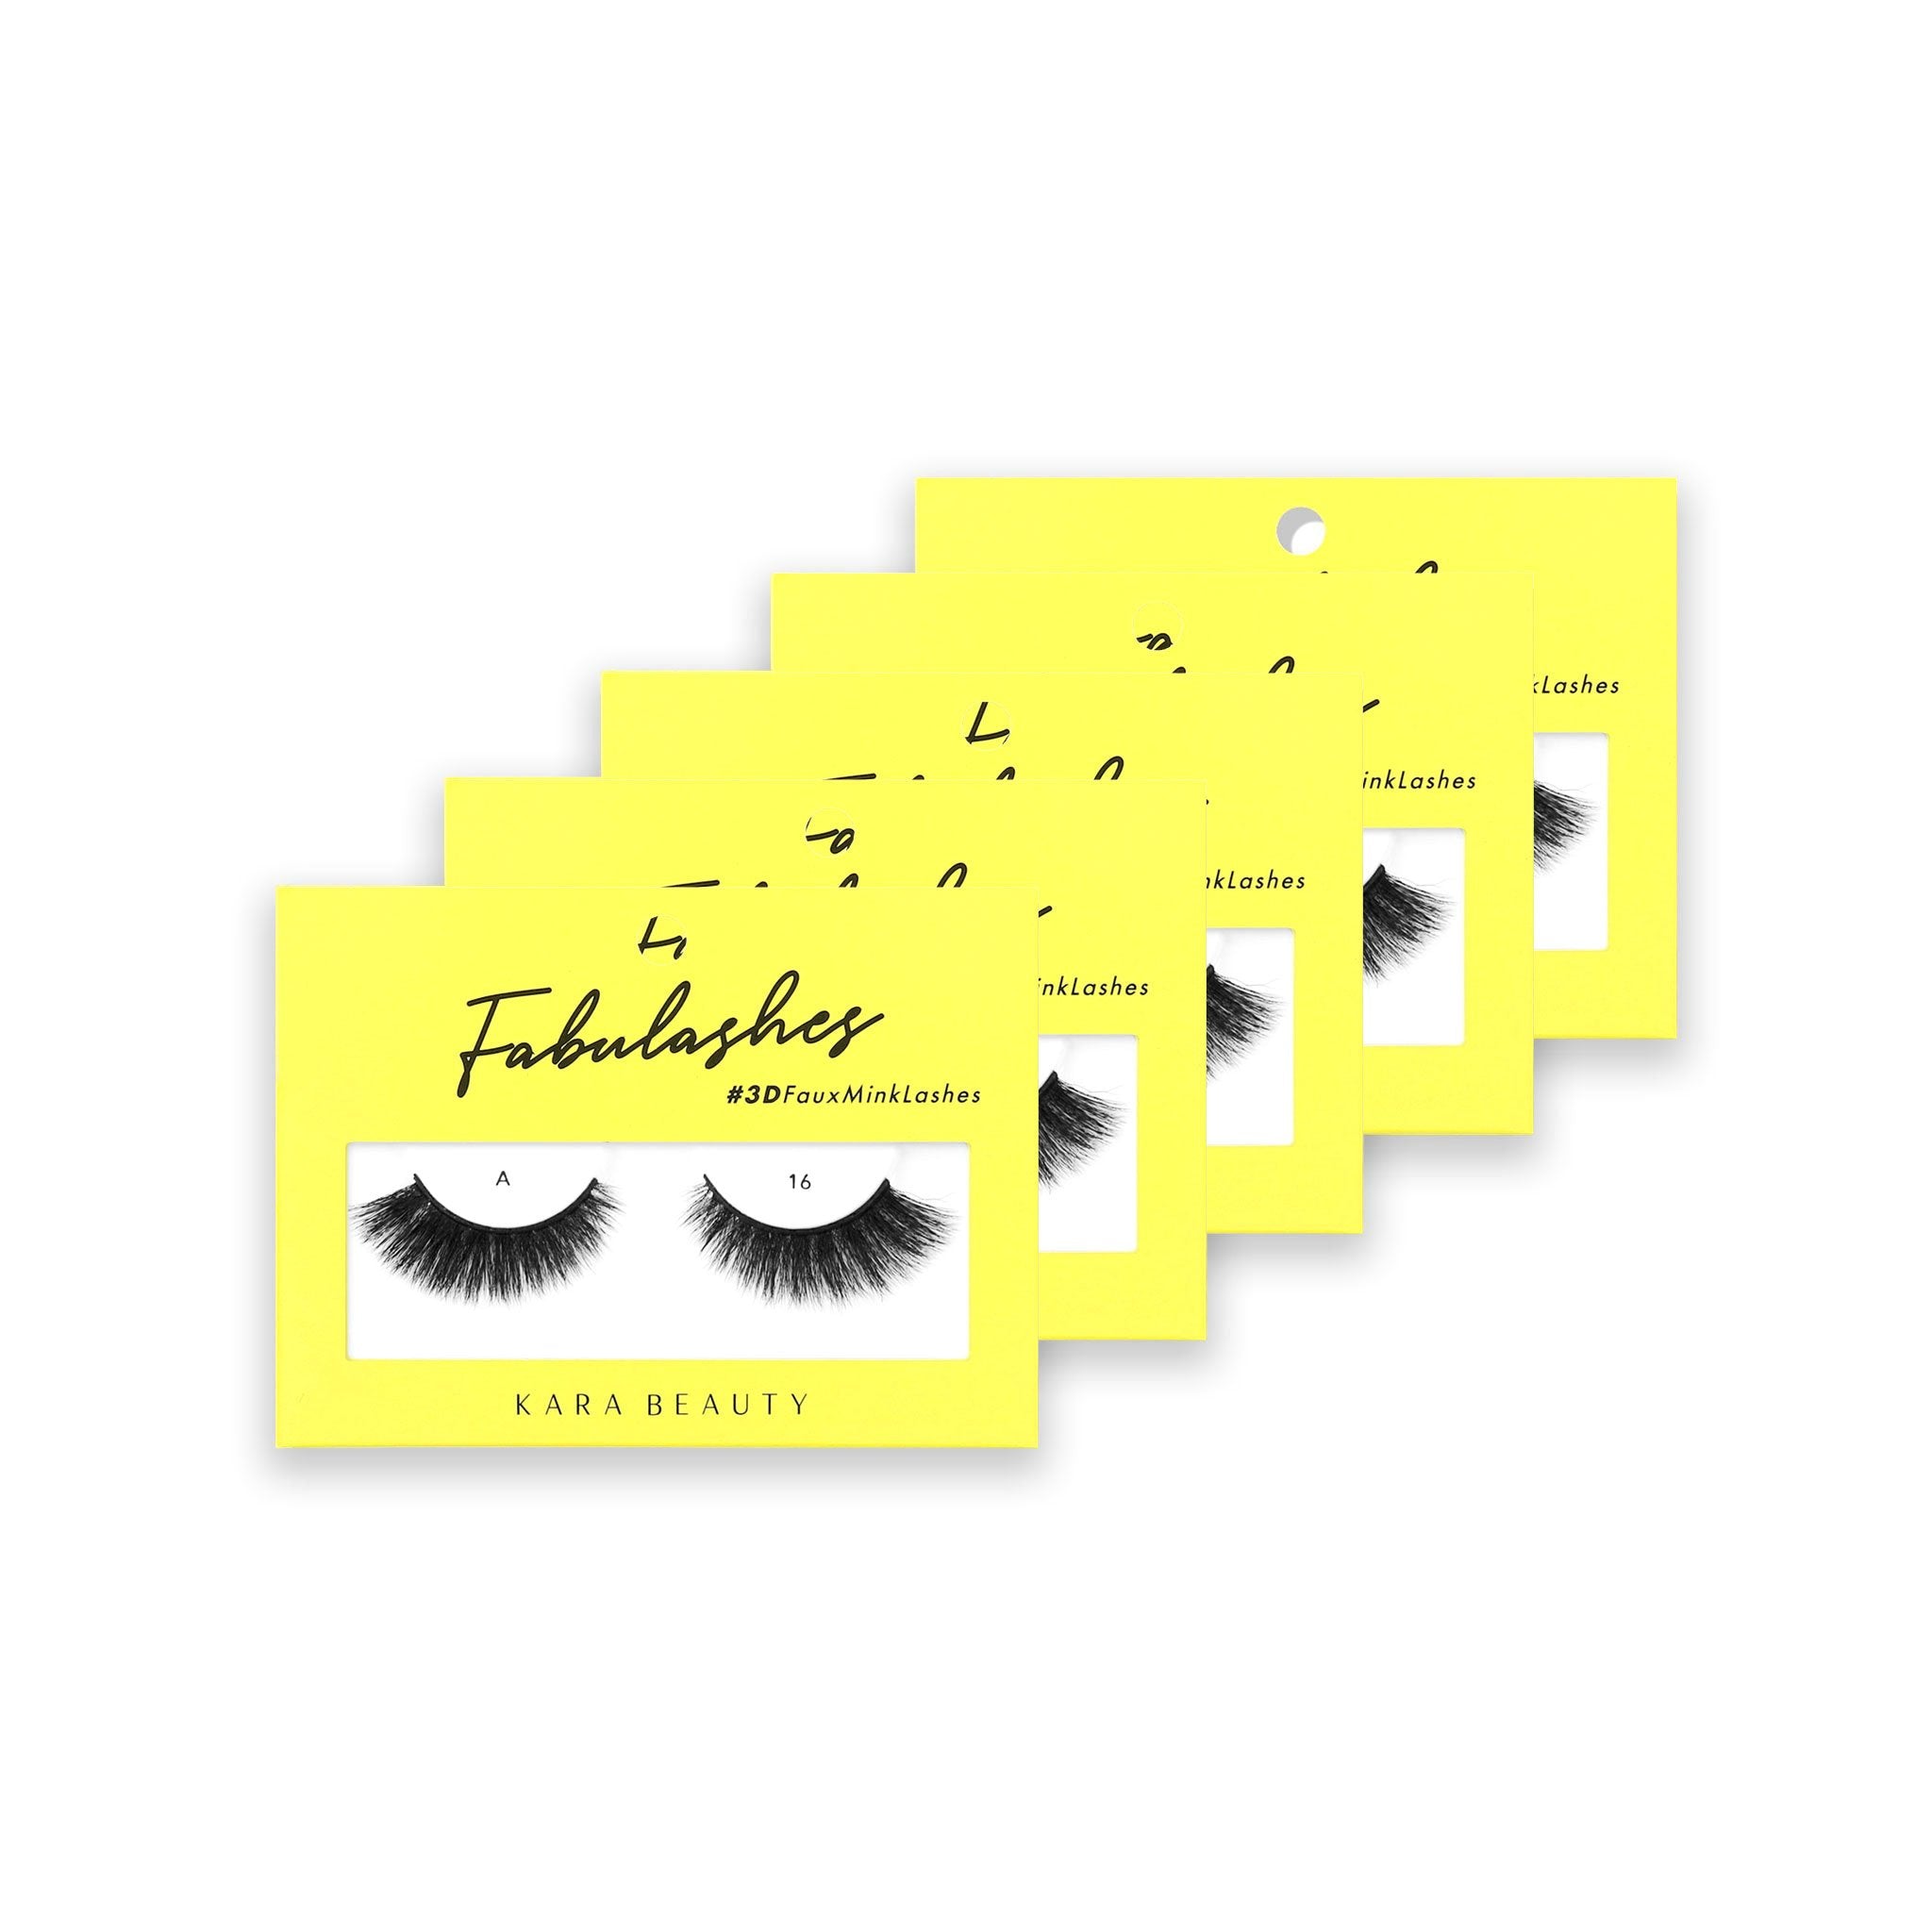 Style A16 Fabulashes 3D faux mink strip eyelashes 5 pack